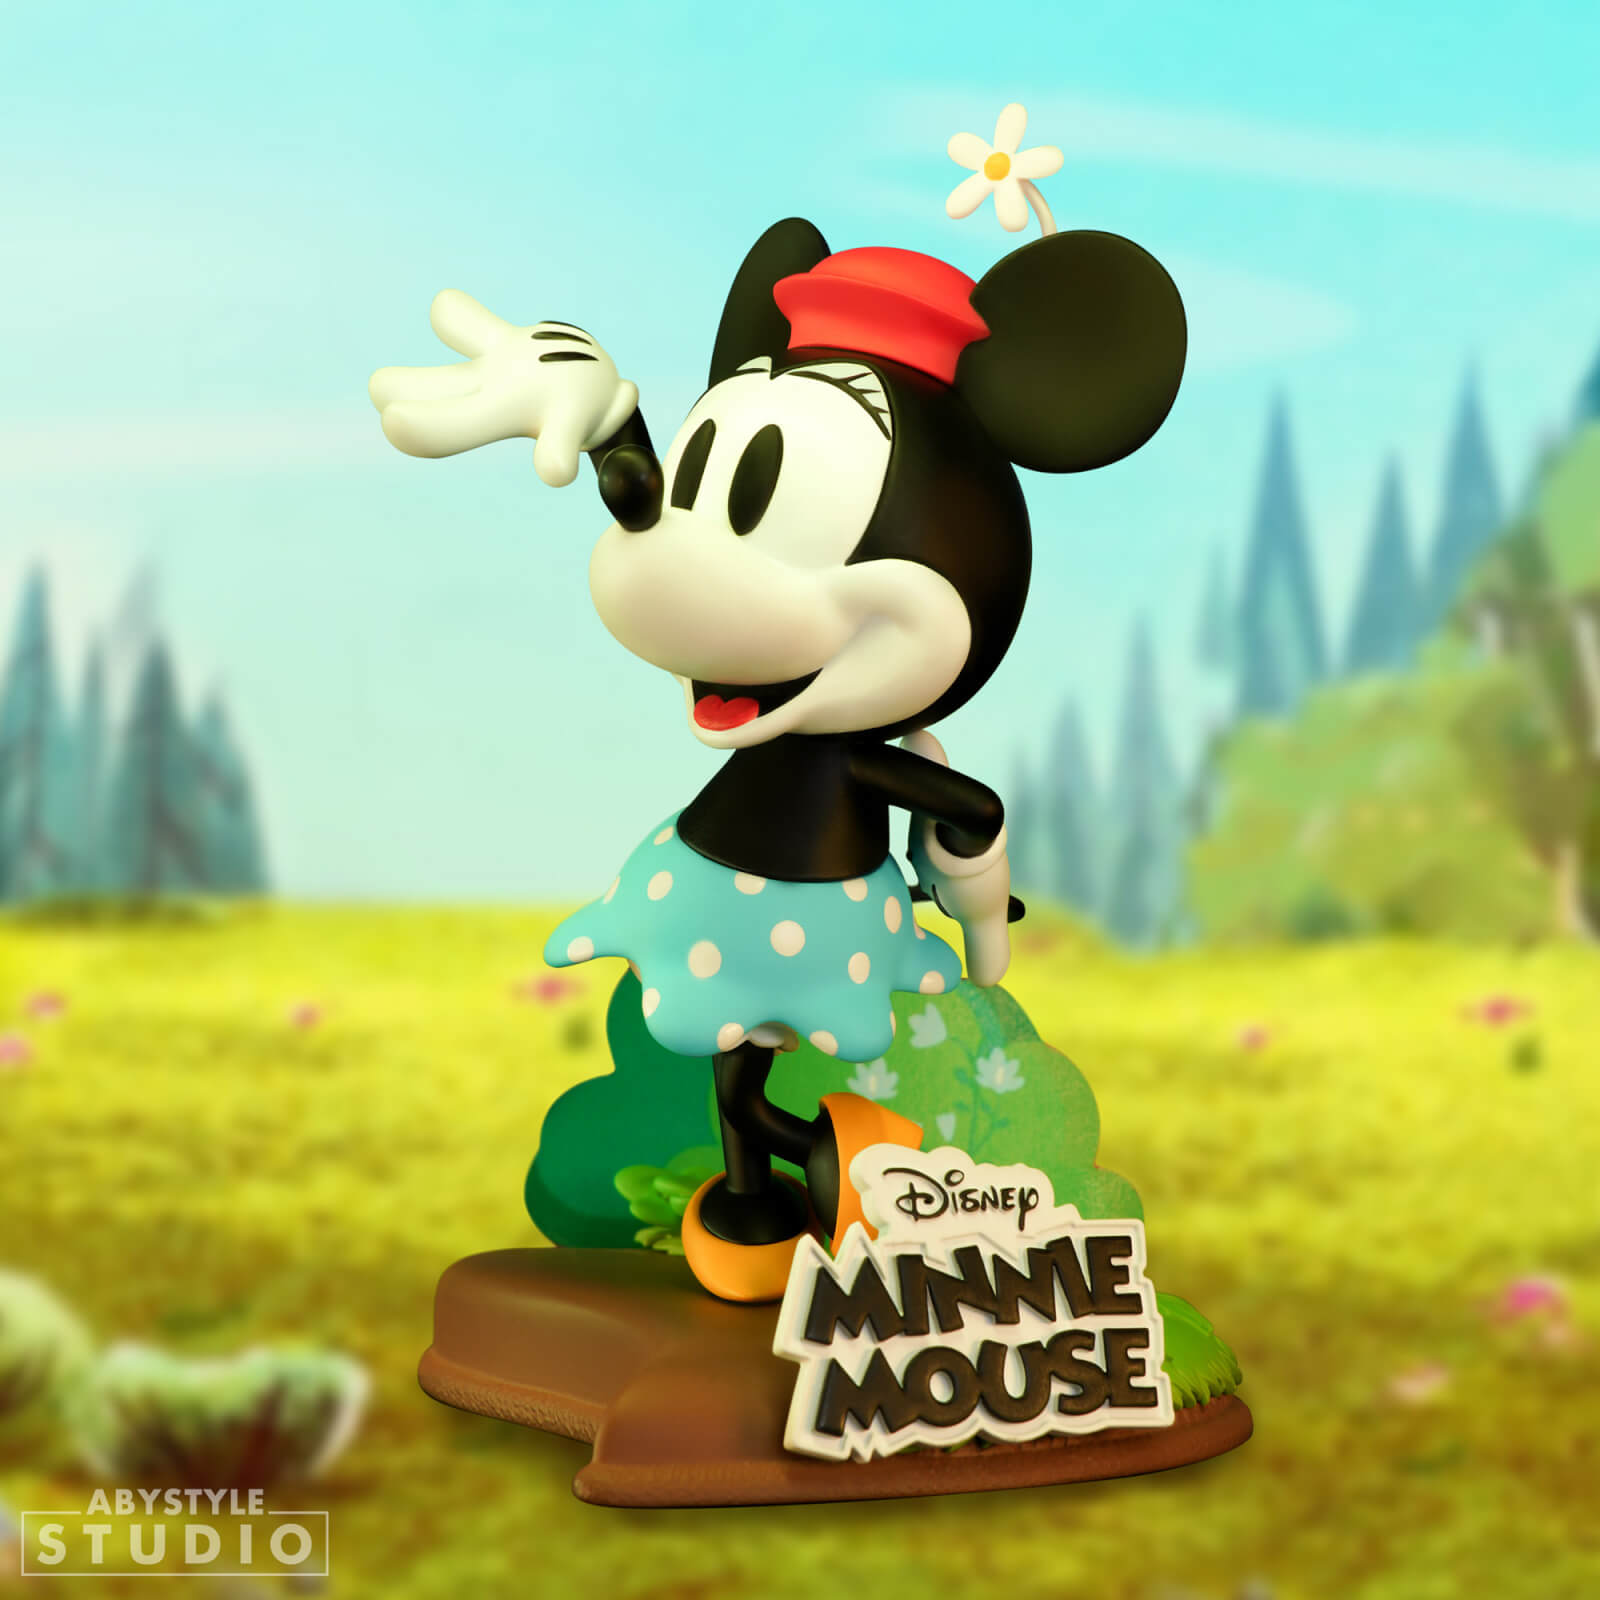 Photos - Action Figures / Transformers Disney Minnie Mouse AbyStyle Studio Figure - 10cm ABYFIG061 